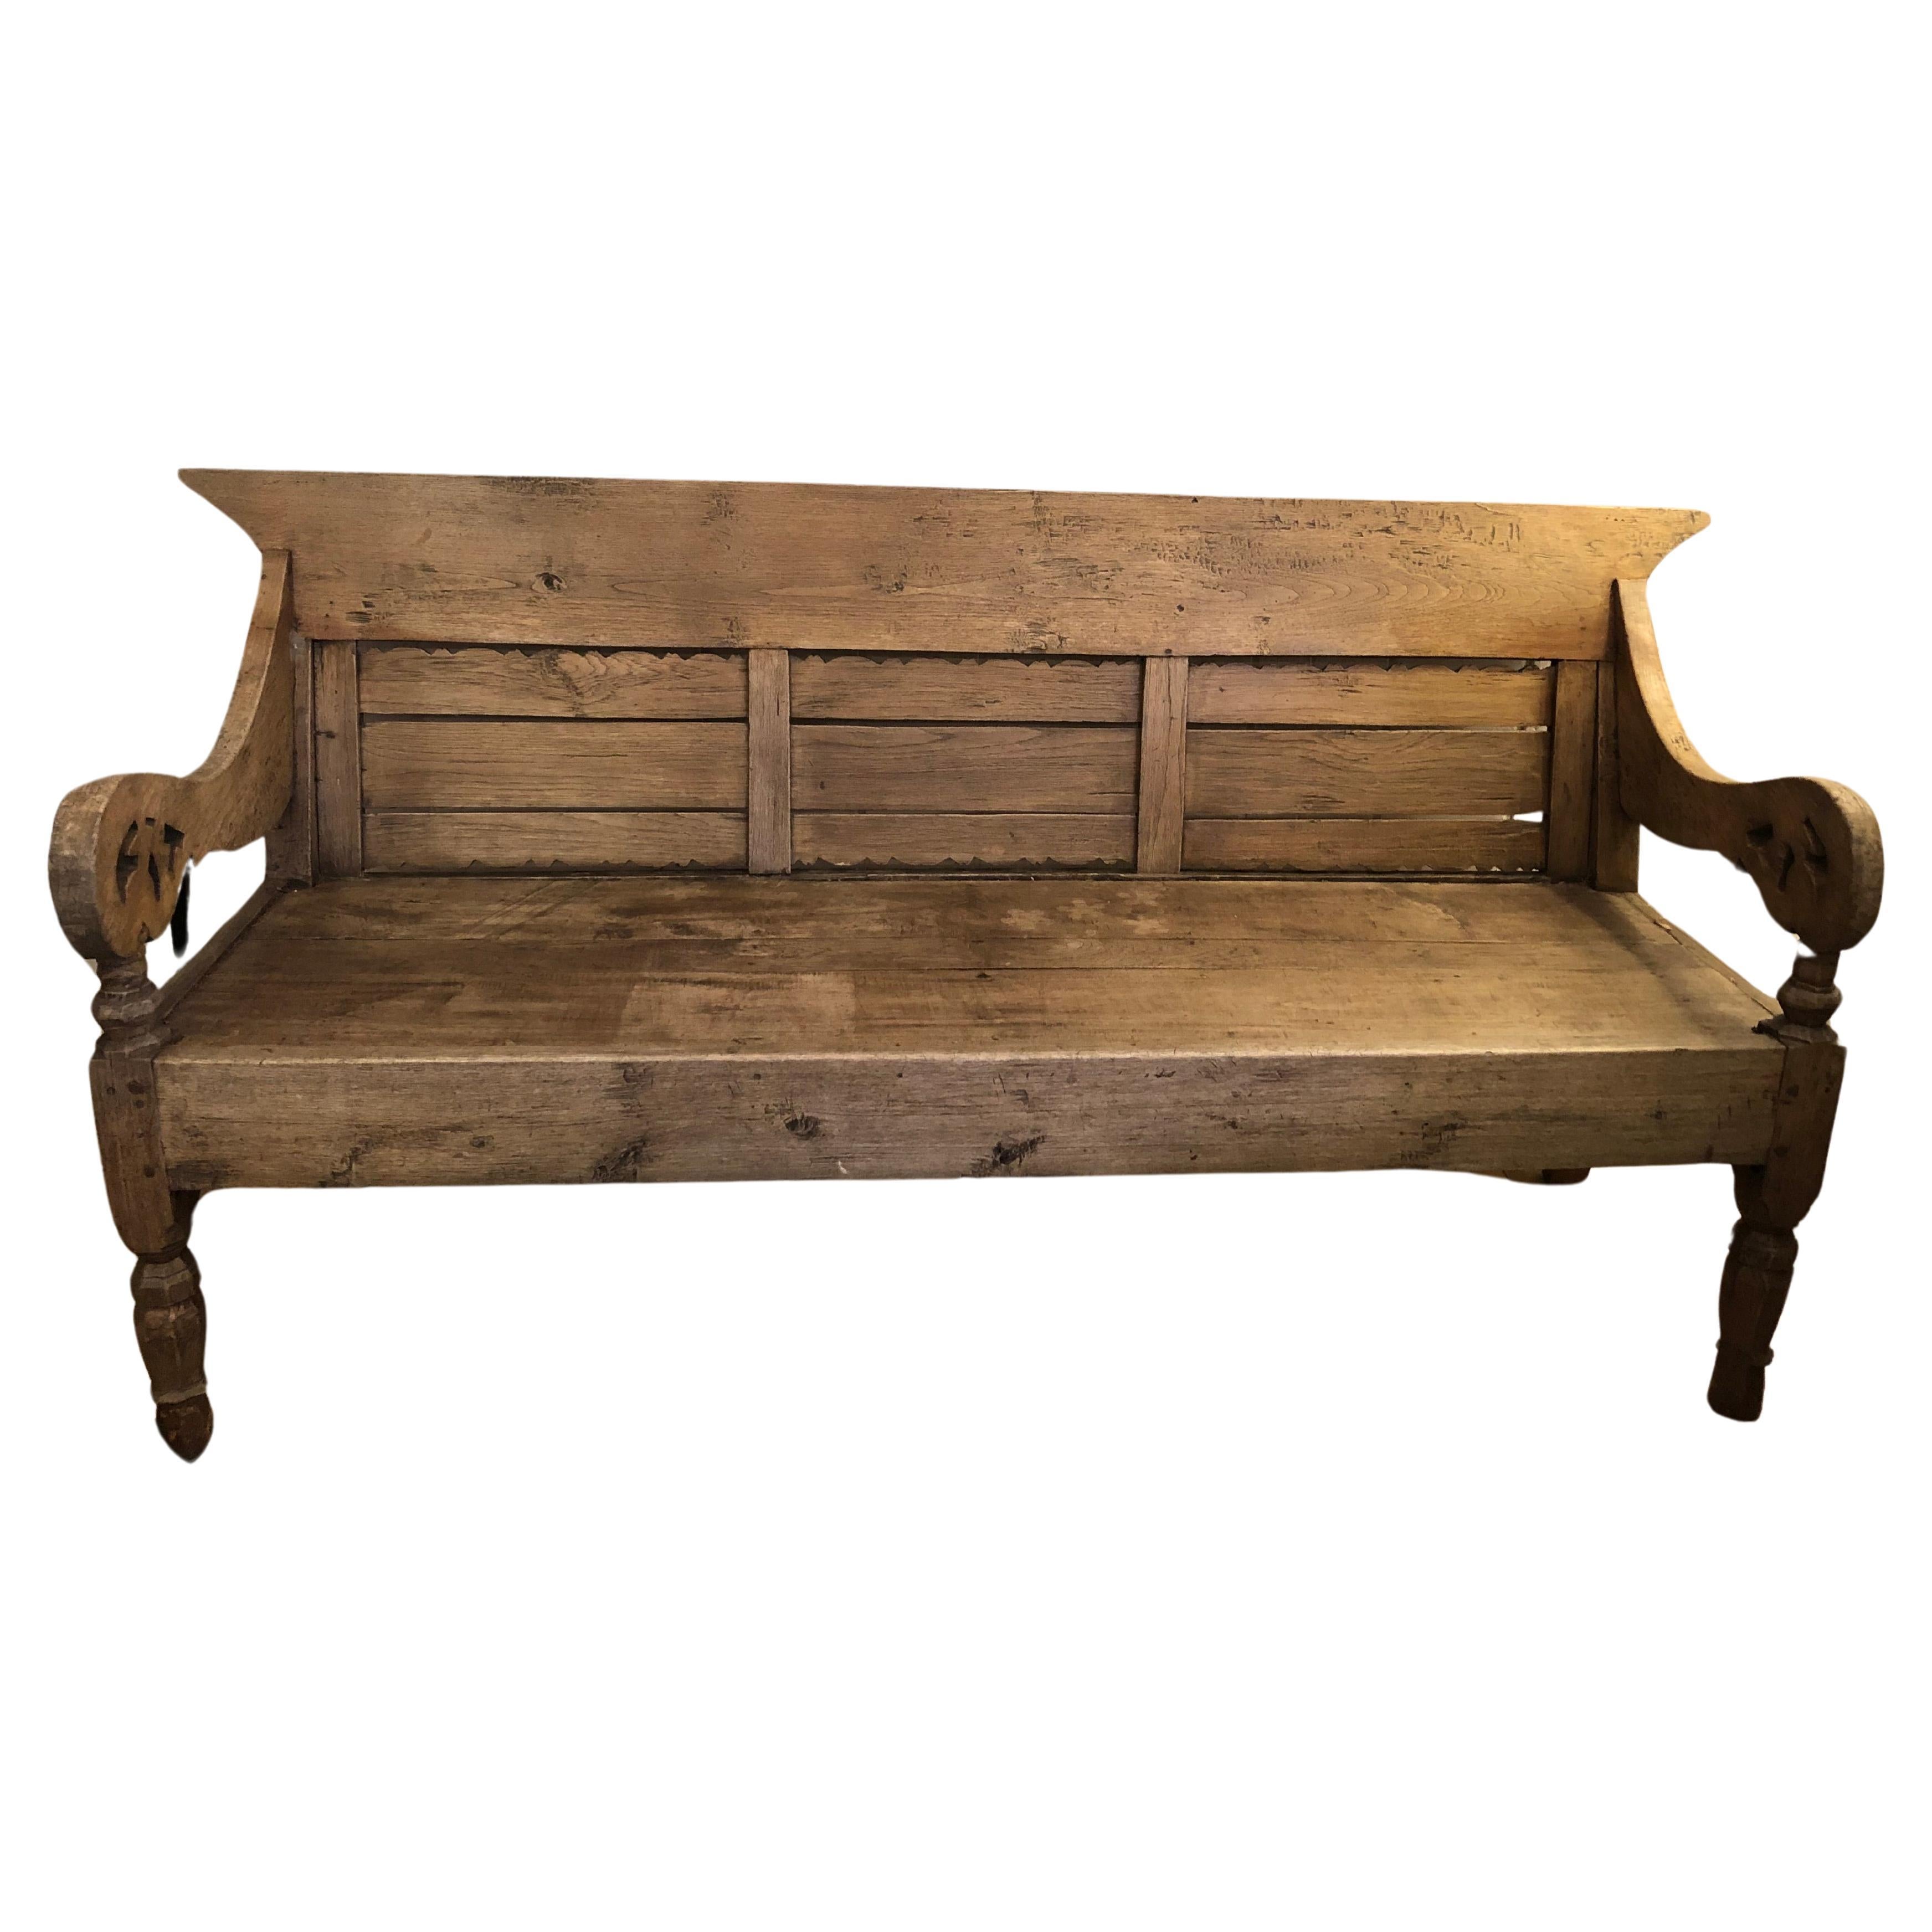 Very Large Rustic Carved Teak Bench from Jakarta